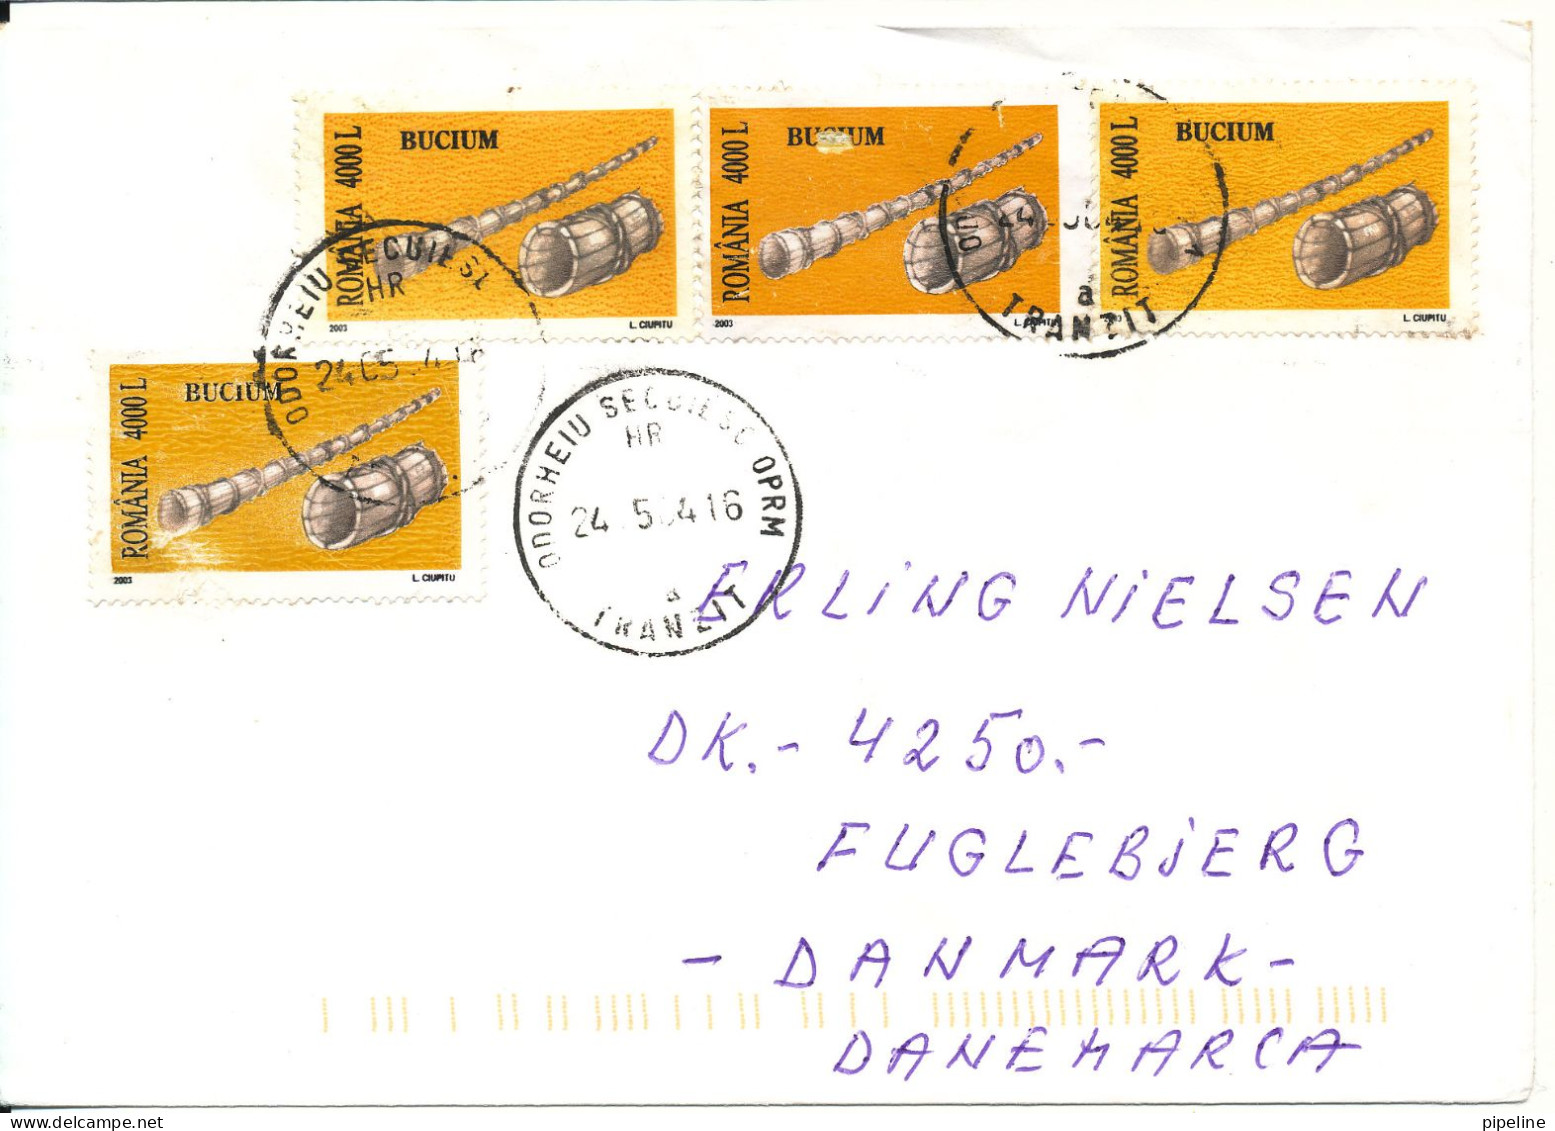 Romania Cover Sent To Denmark 24-5-2004 Topic Stamps Music Instruments - Covers & Documents